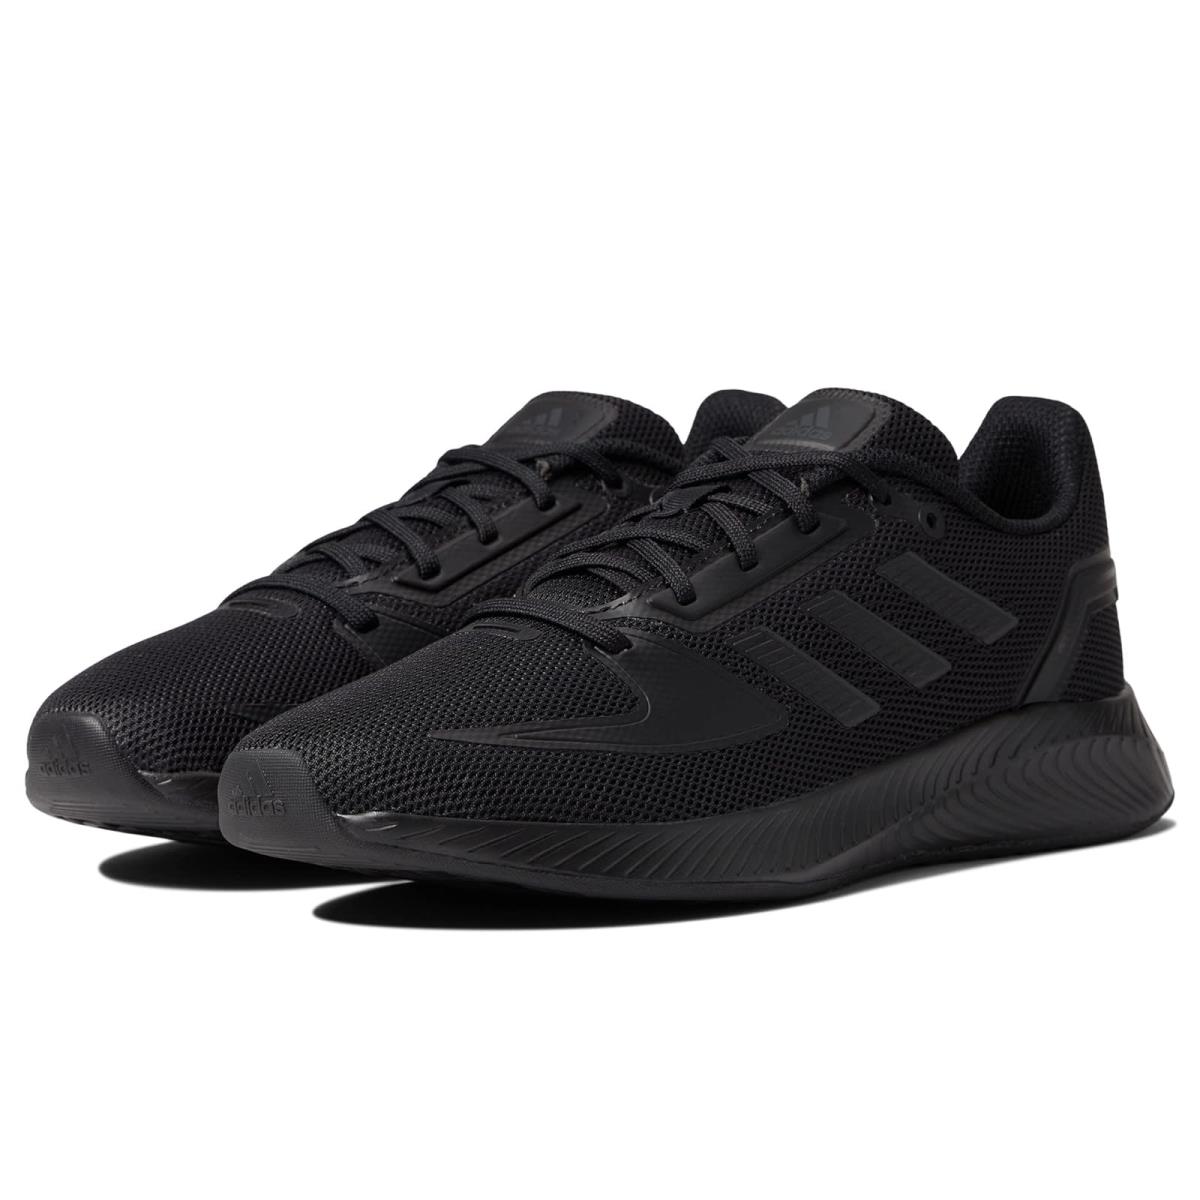 Woman`s Sneakers Athletic Shoes Adidas Running Runfalcon 2.0 Black/Black/Carbon